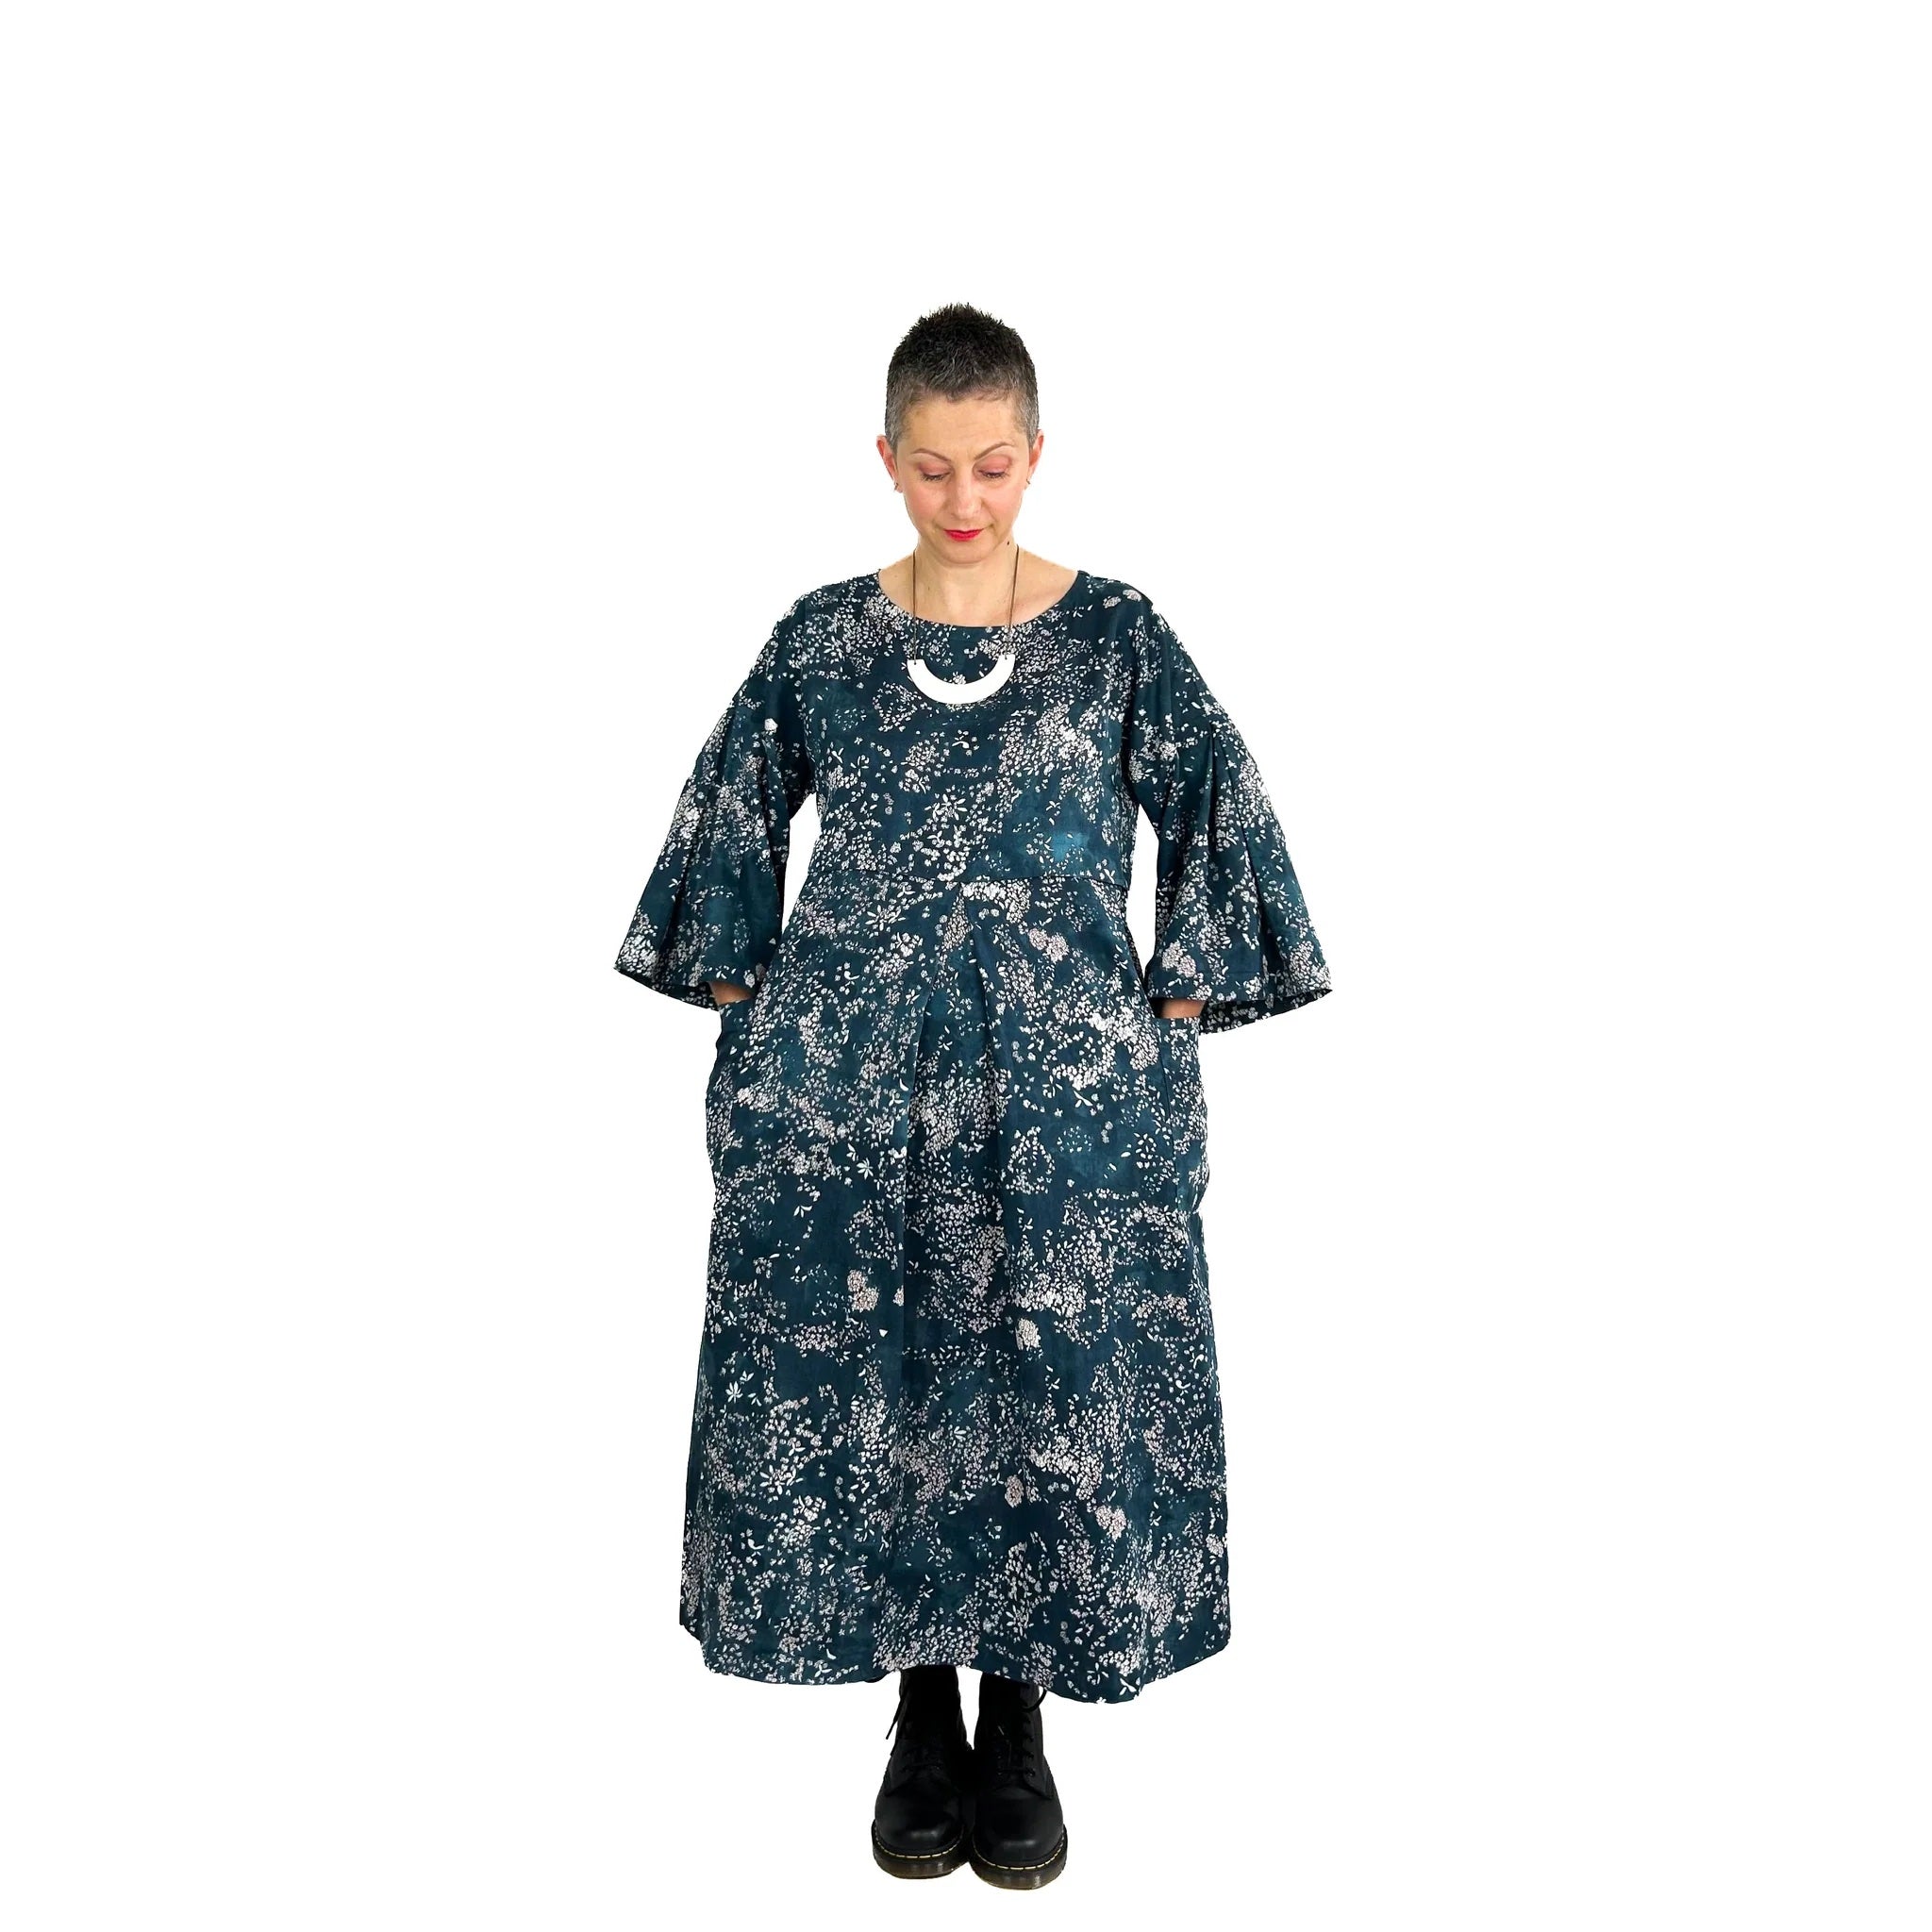 Woman wearing the Martha Dress sewing pattern from Dhurata Davies Patterns on The Fold Line. A dress pattern made in linen or woven fabrics, featuring a relaxed fit, ¾ length wide sleeves, round neckline, patch pockets, deep inverted pleat at the shoulder